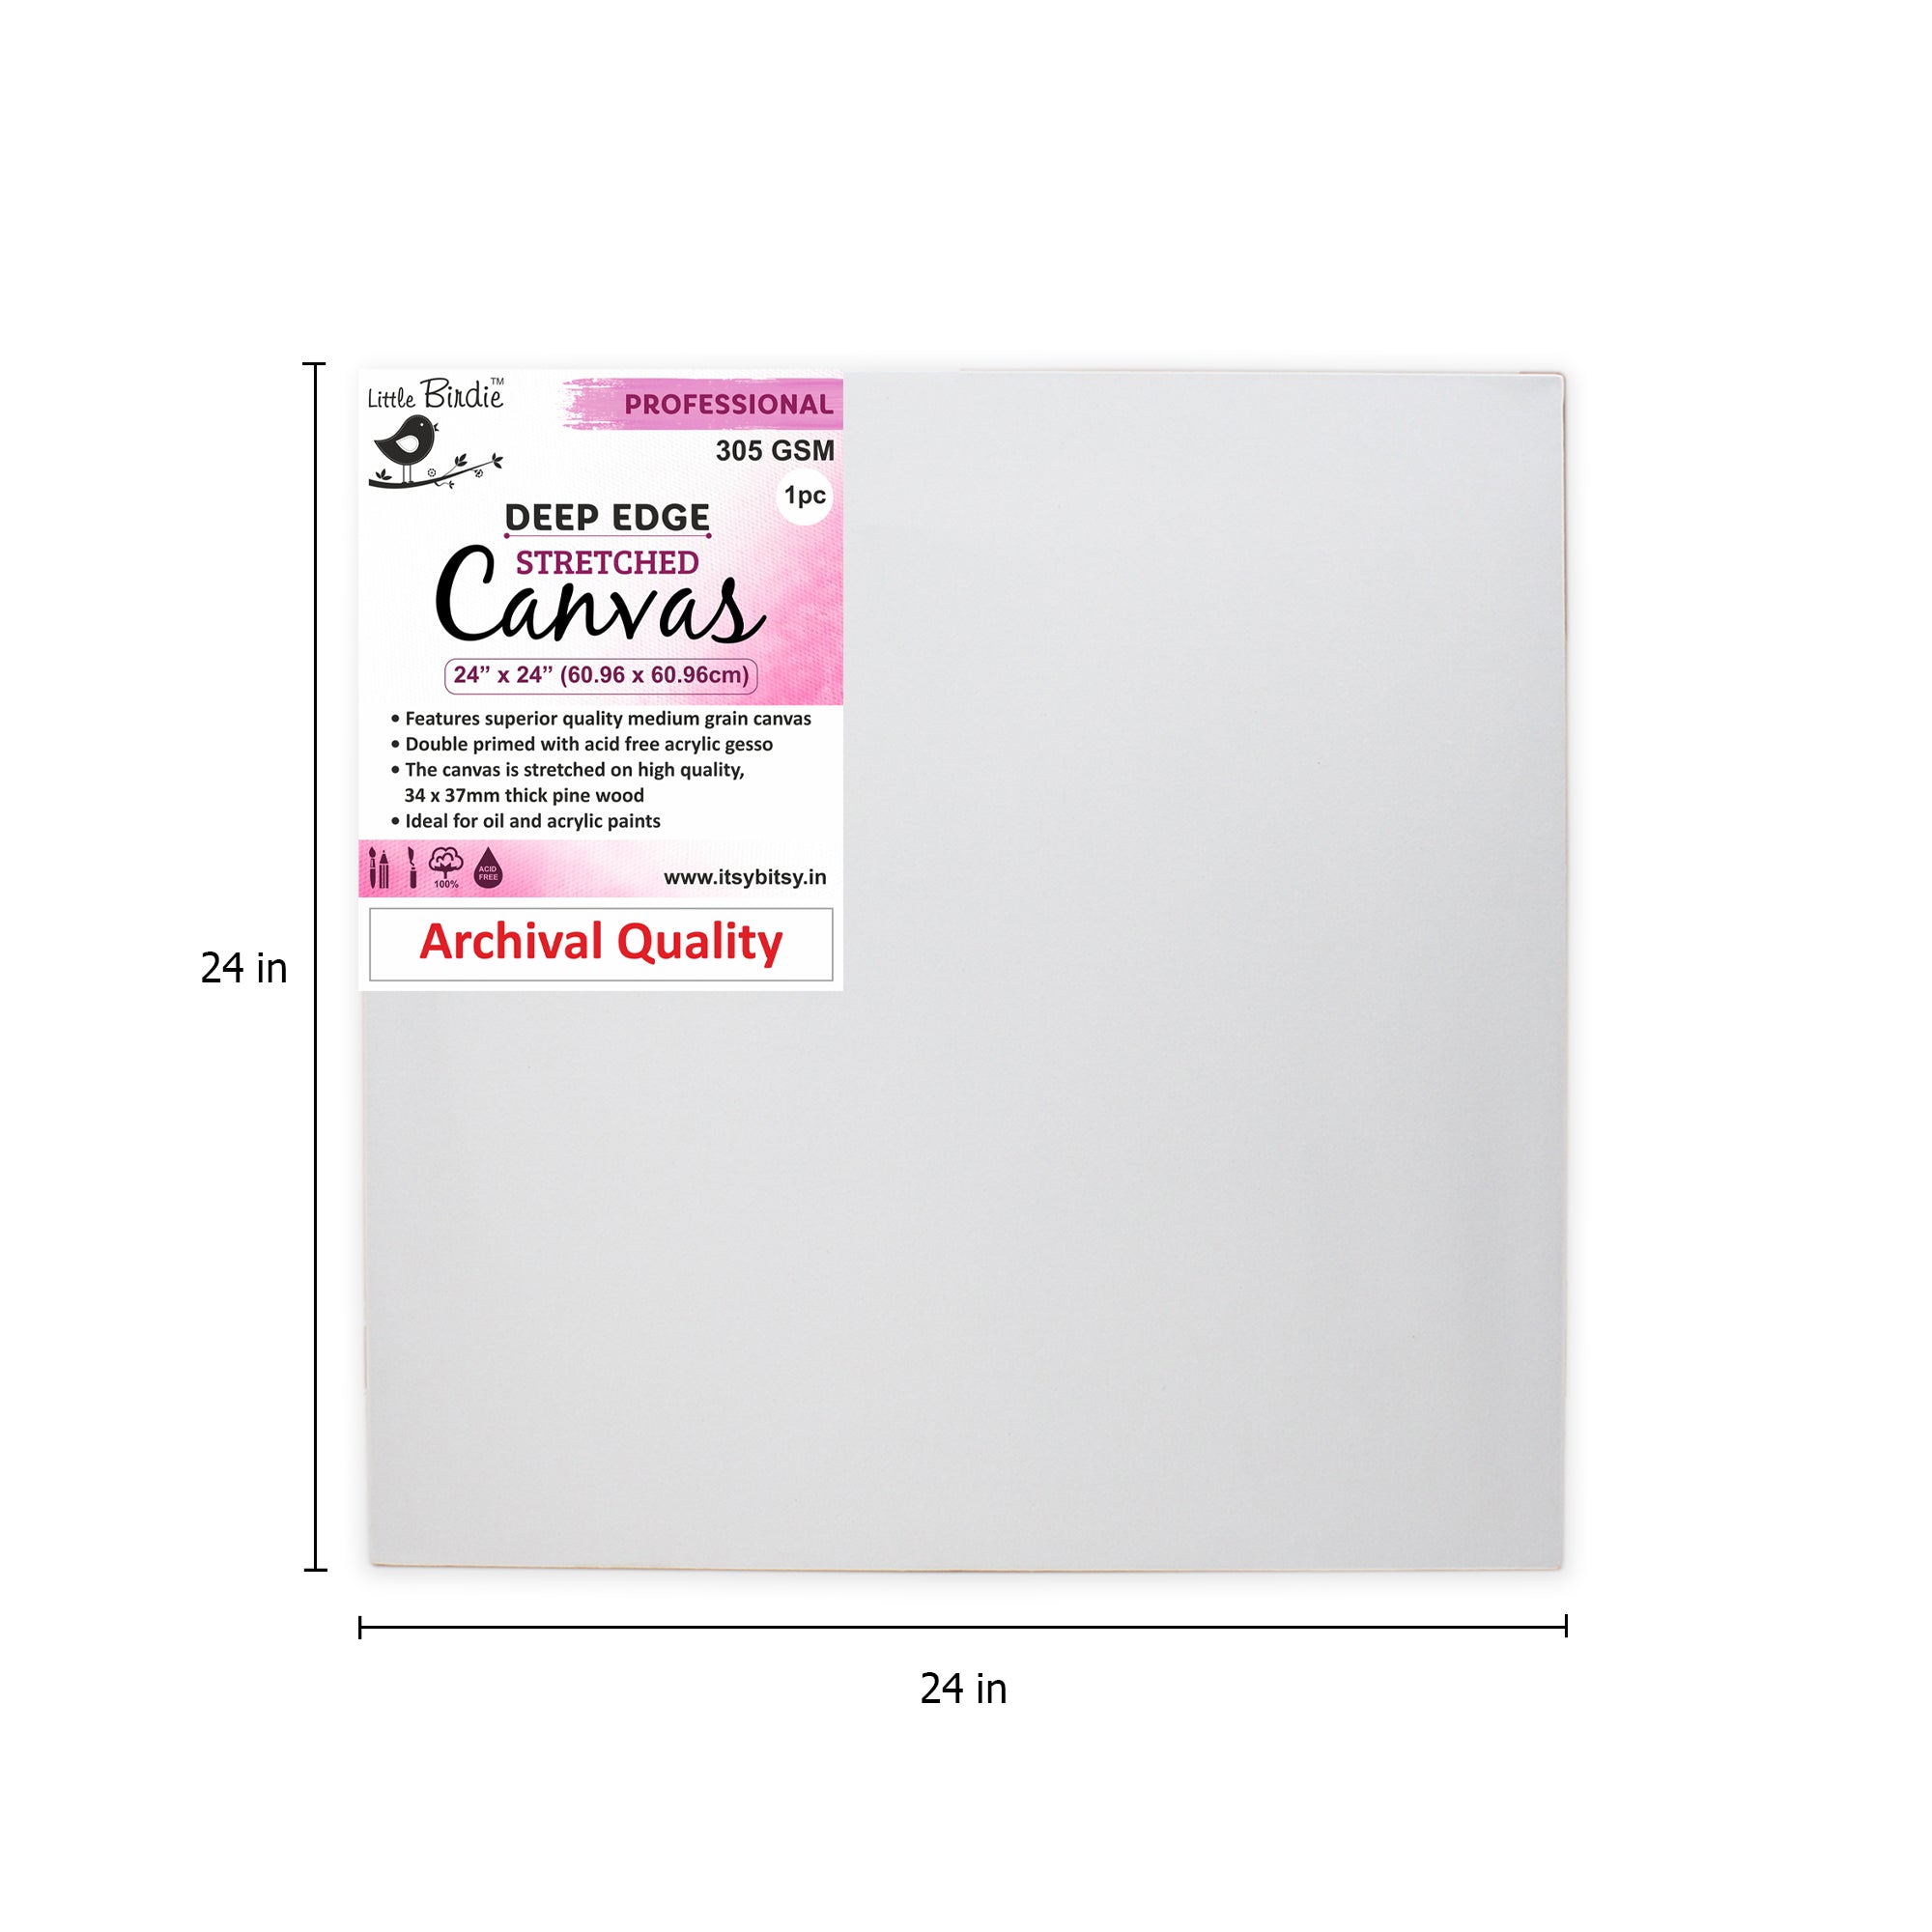 Stretched Canvas Deep Edge Frame 34X37Mm 305Gsm 24 X 24Inch 1Pc (Pack of 3)